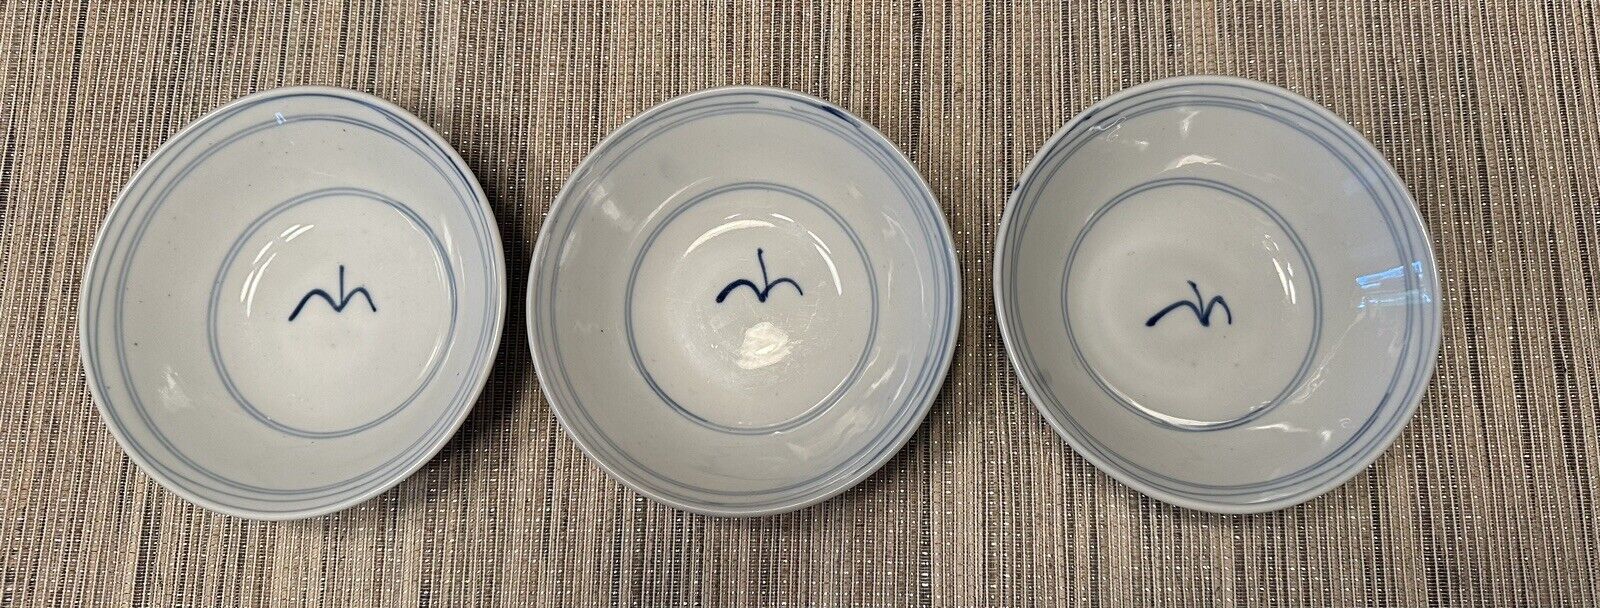 Set of 3 1960s Chinese Blue and White Porcelain Rice/Soup Bowls Vintage